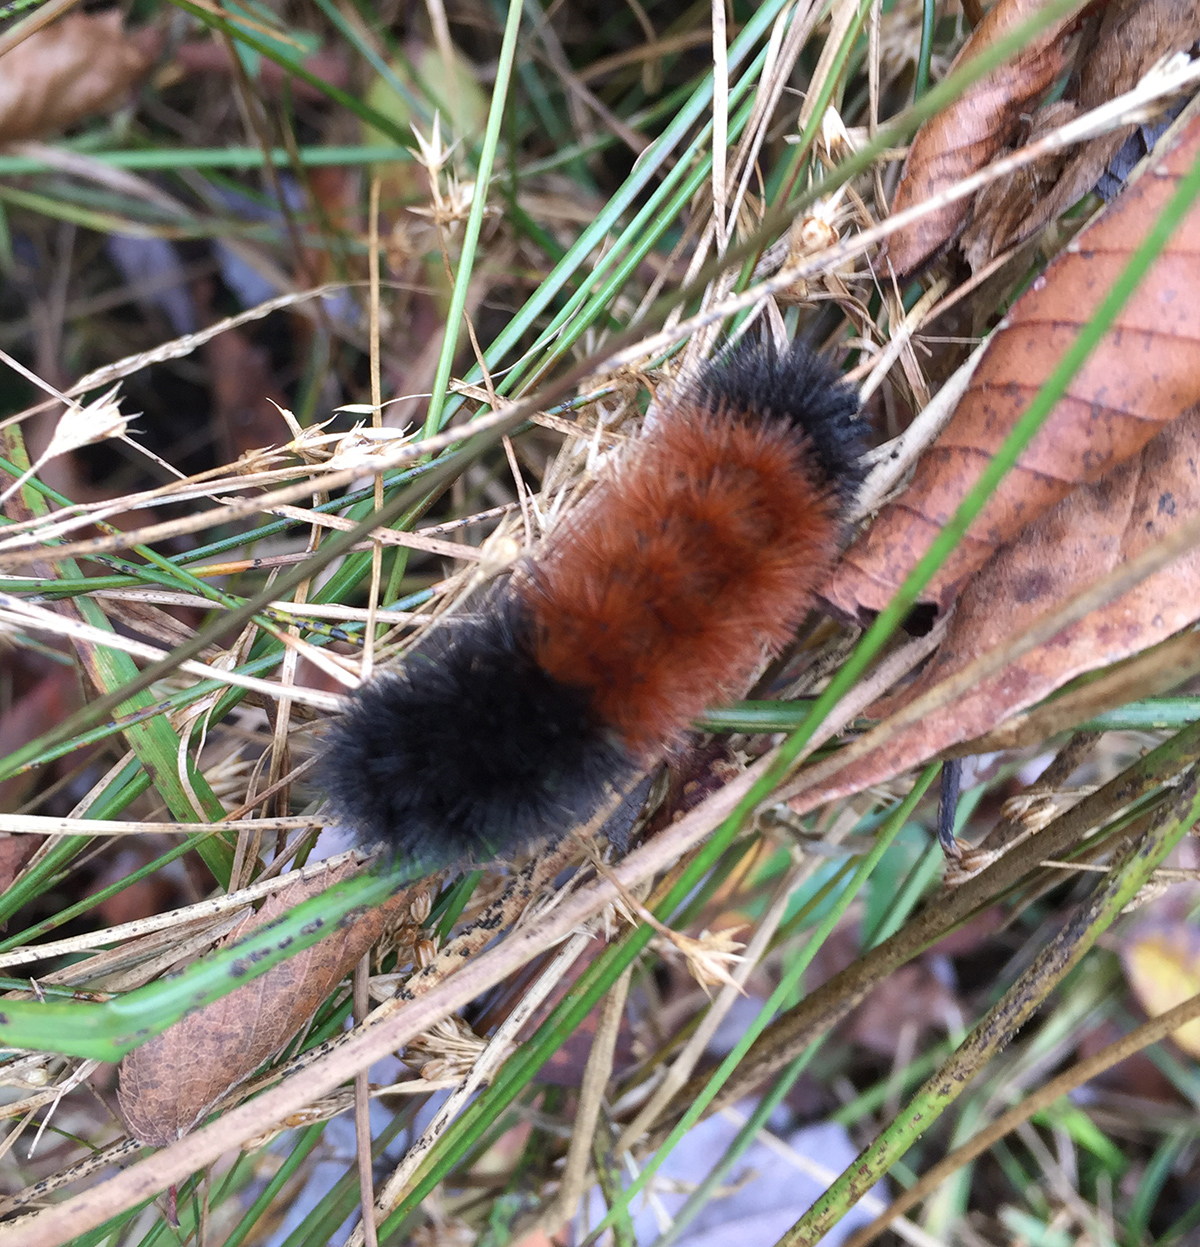 The Wooly Caterpillar!